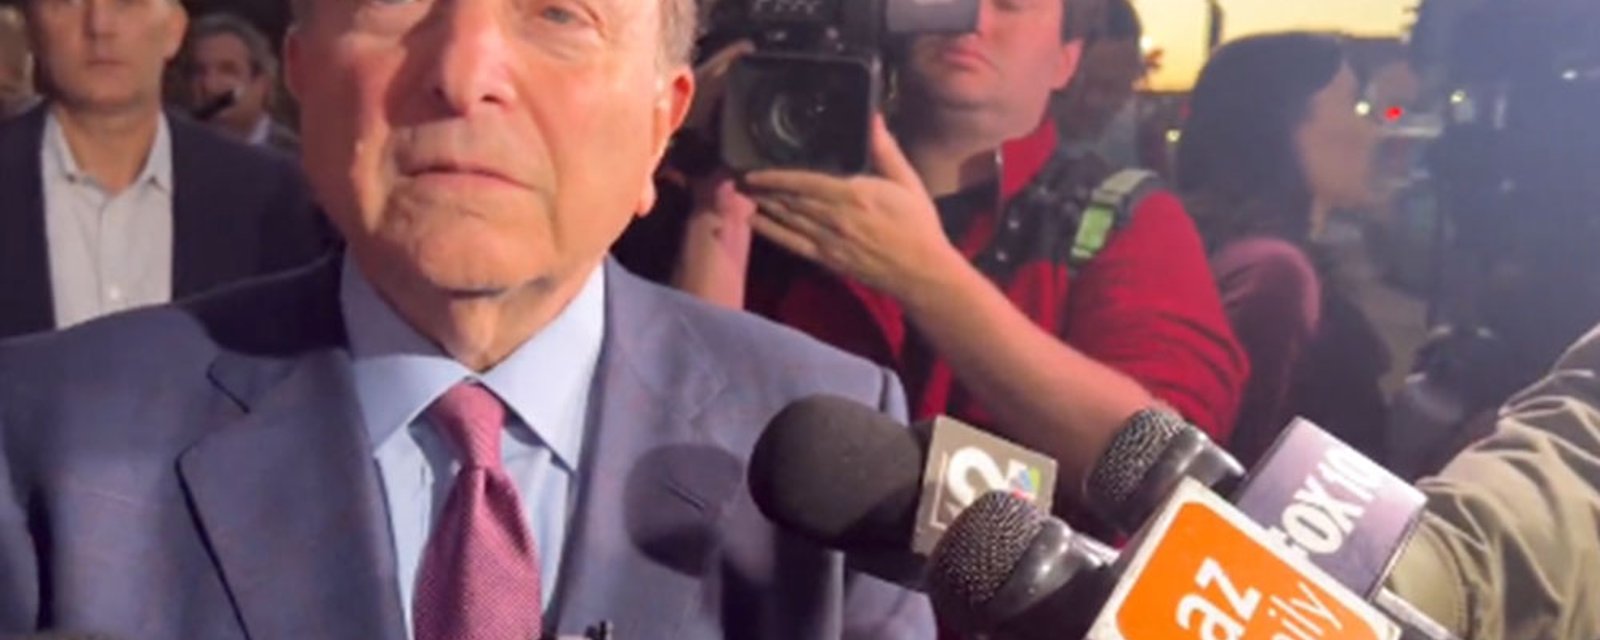 Gary Bettman swarmed by media as he arrives in Arizona to help bail out the Coyotes